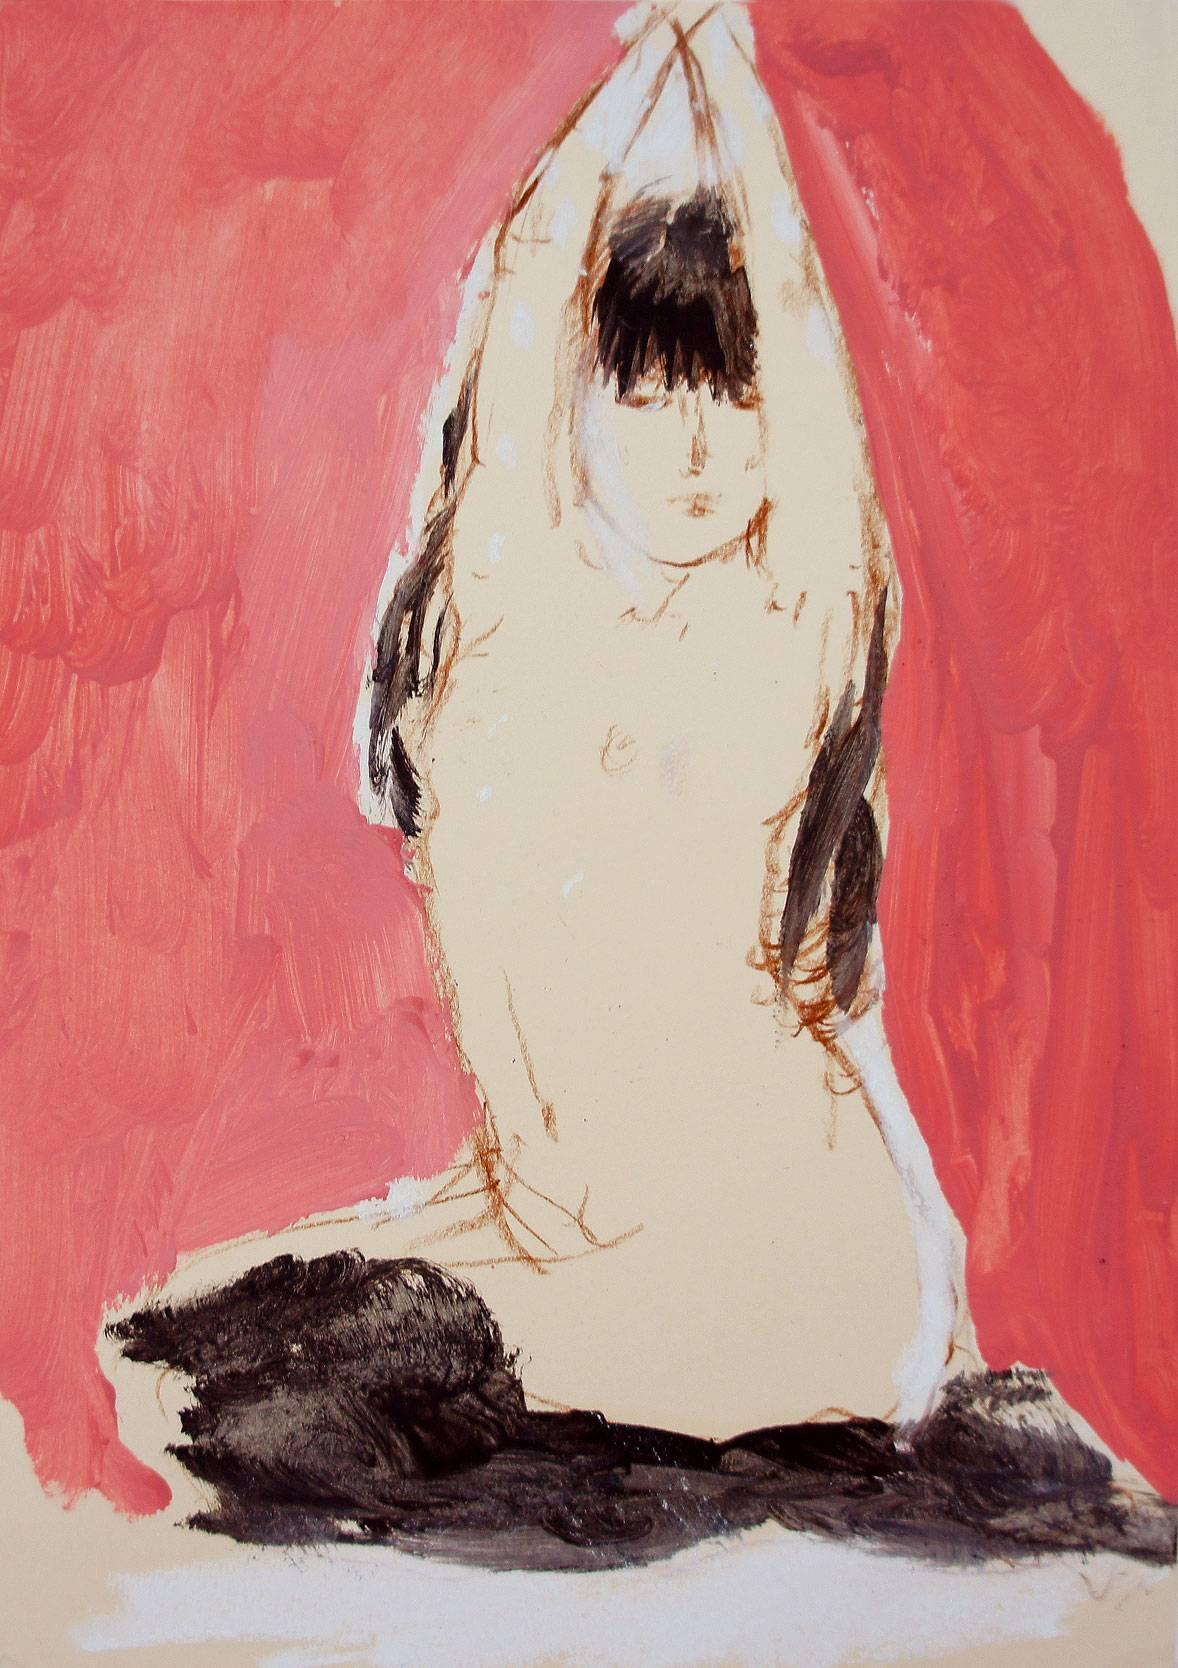 This oil and oil pastel on paper, depicts a female figure looking back at us wearing only black leggings.  Her arms are raised in an upward stretch.  Her figure is set on a pink background where we see the lines of each brush stroke.

Eduardo